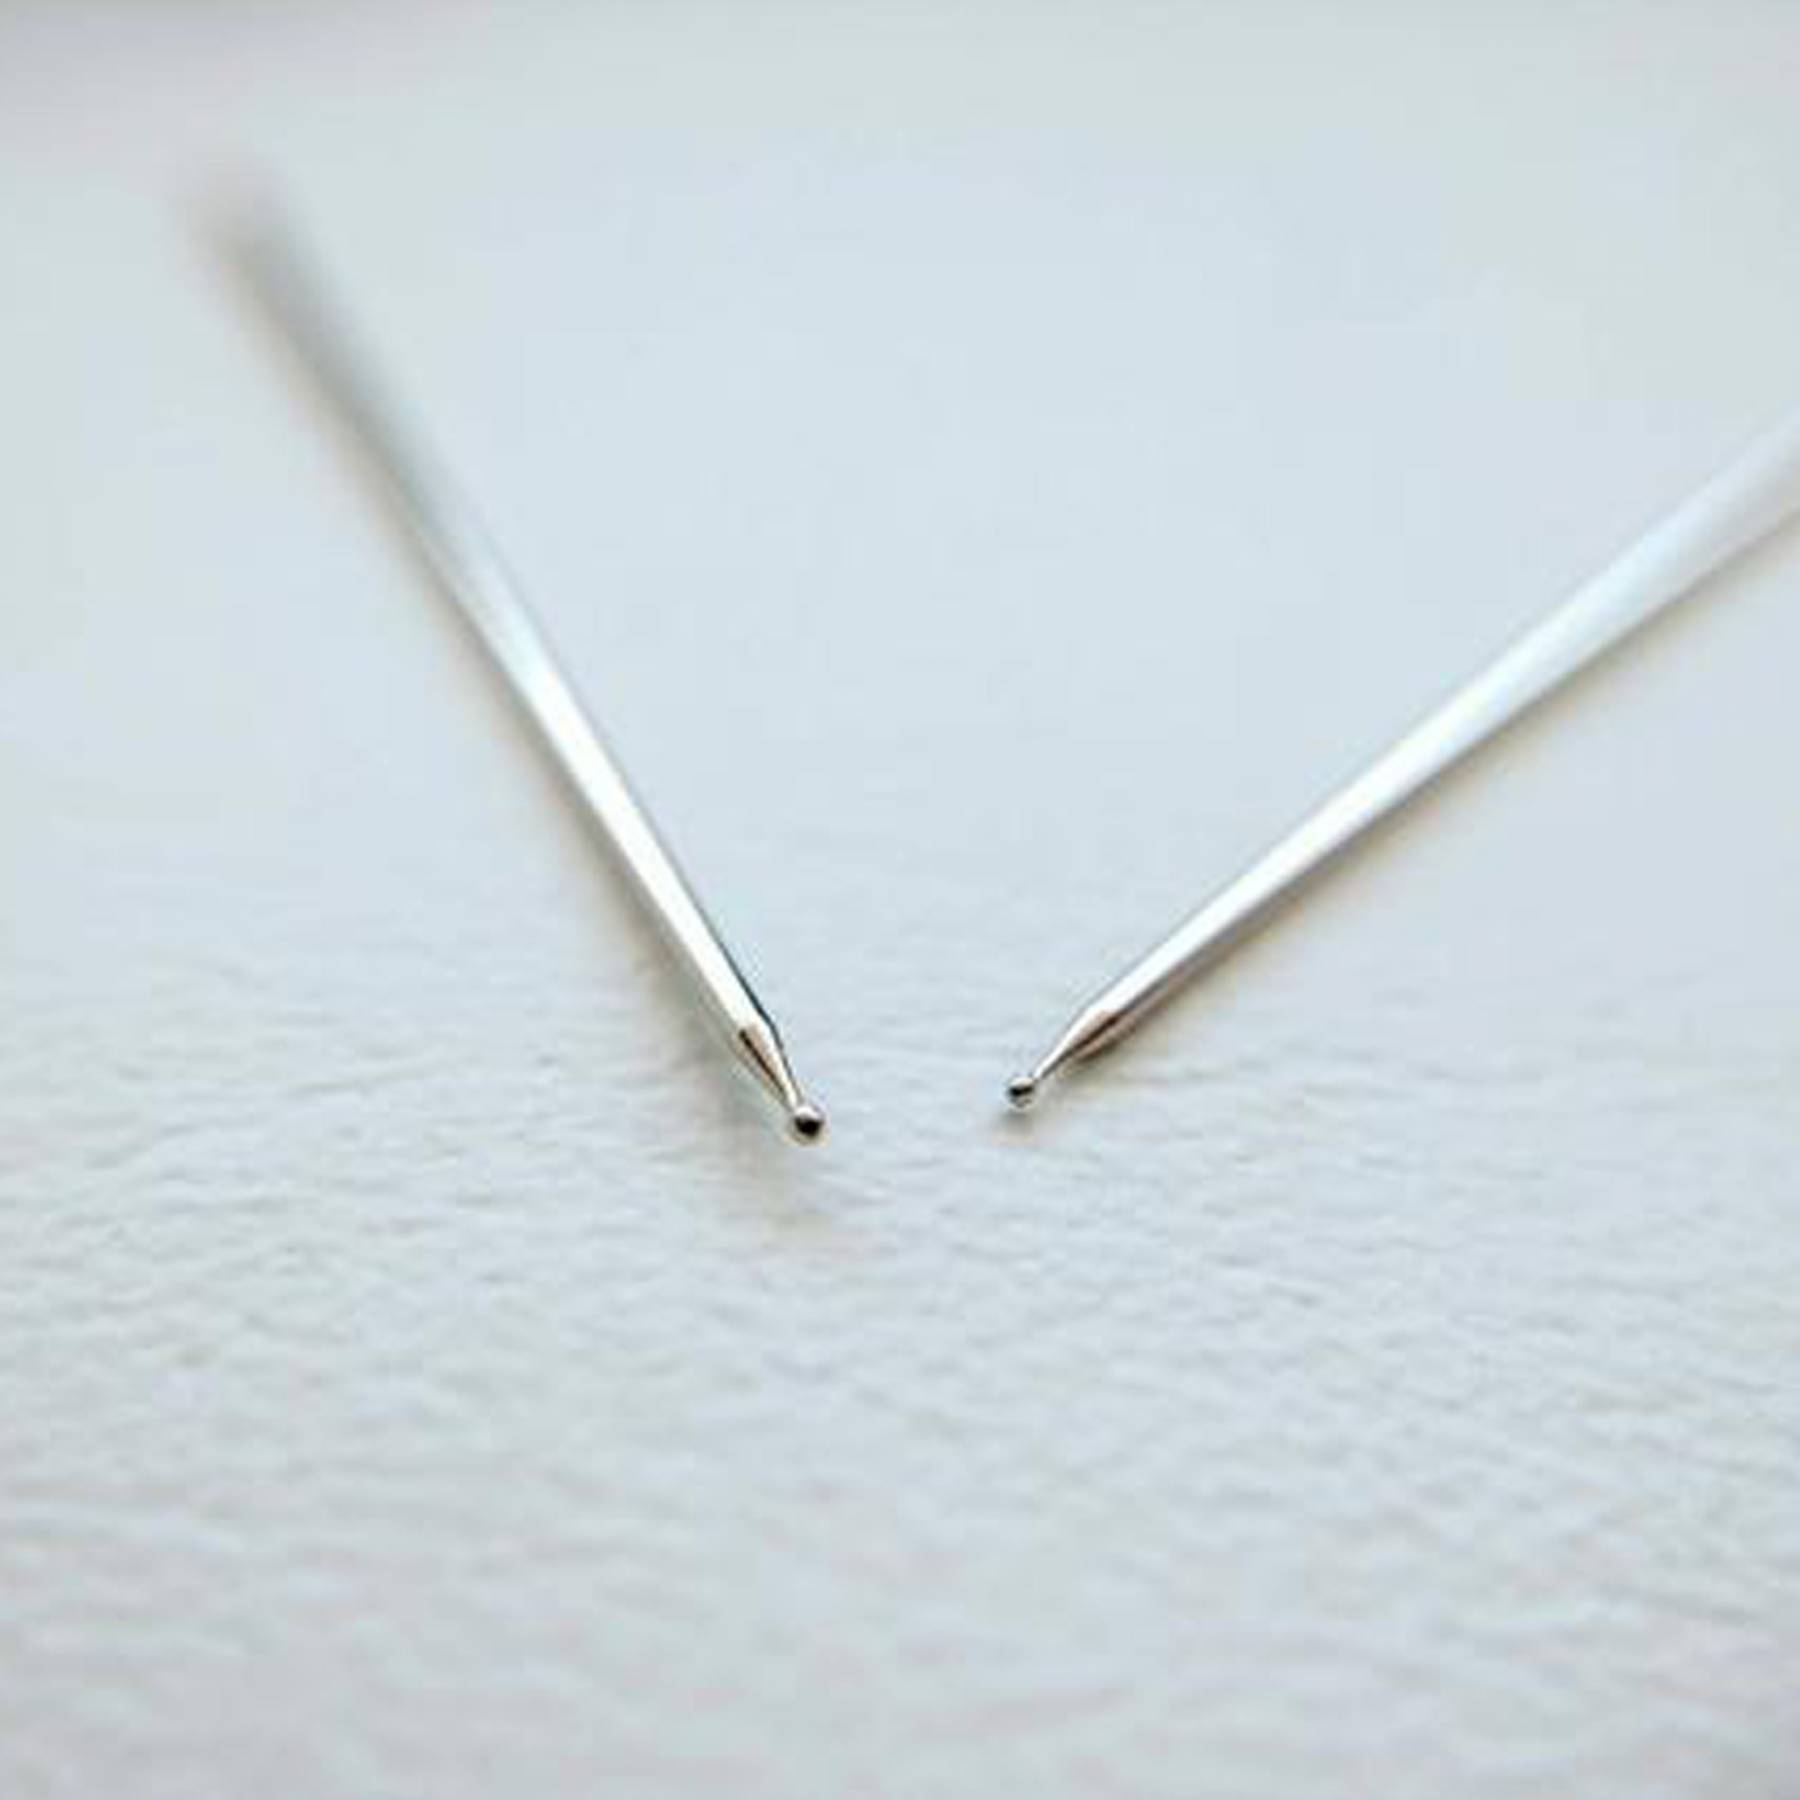 These Large Eye Sewing Needles Are Ideal For You!